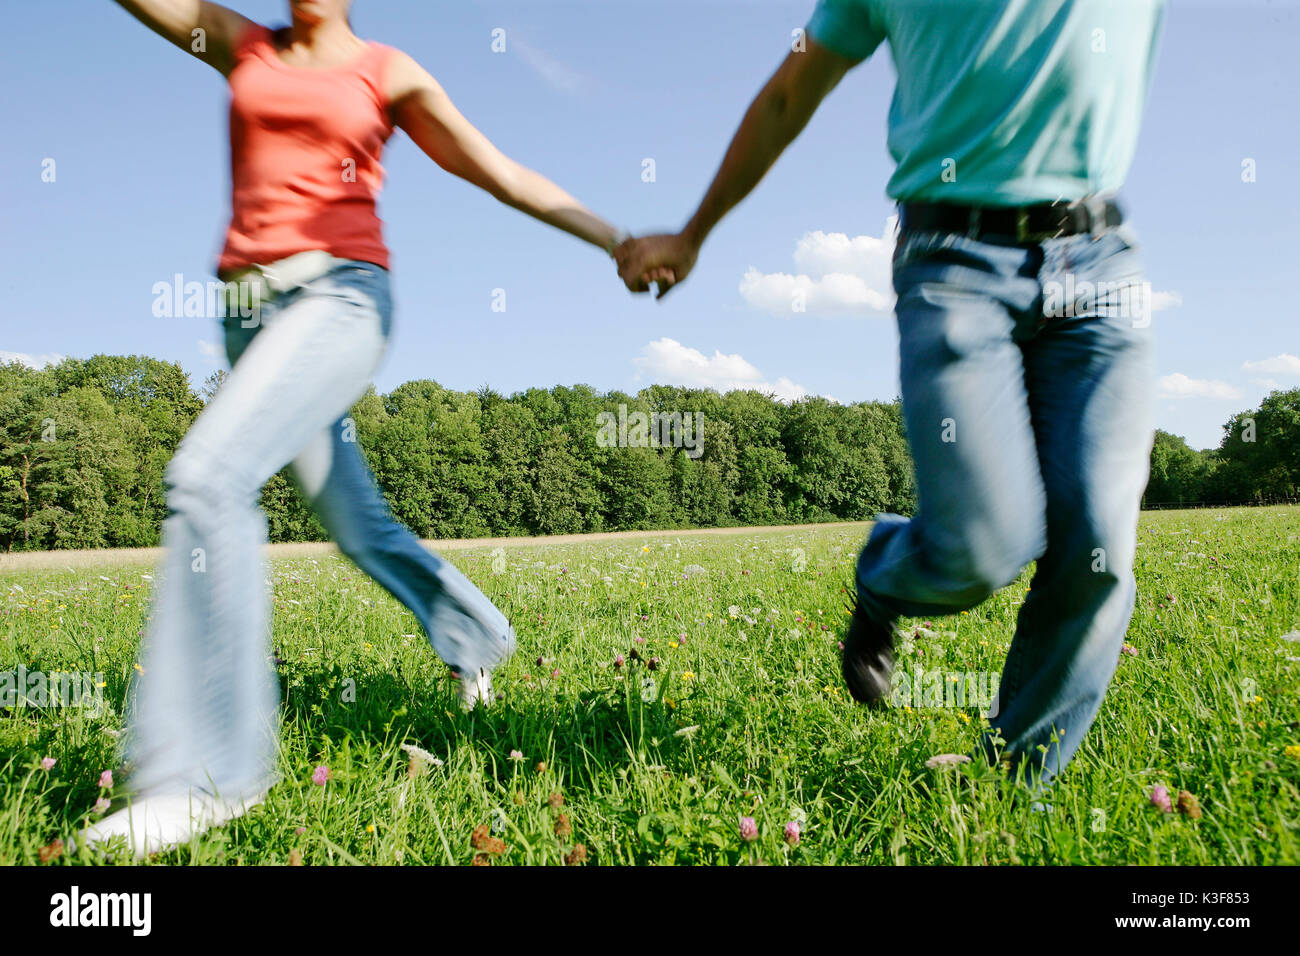 Young couple runs hand in hand over a meadow Stock Photo